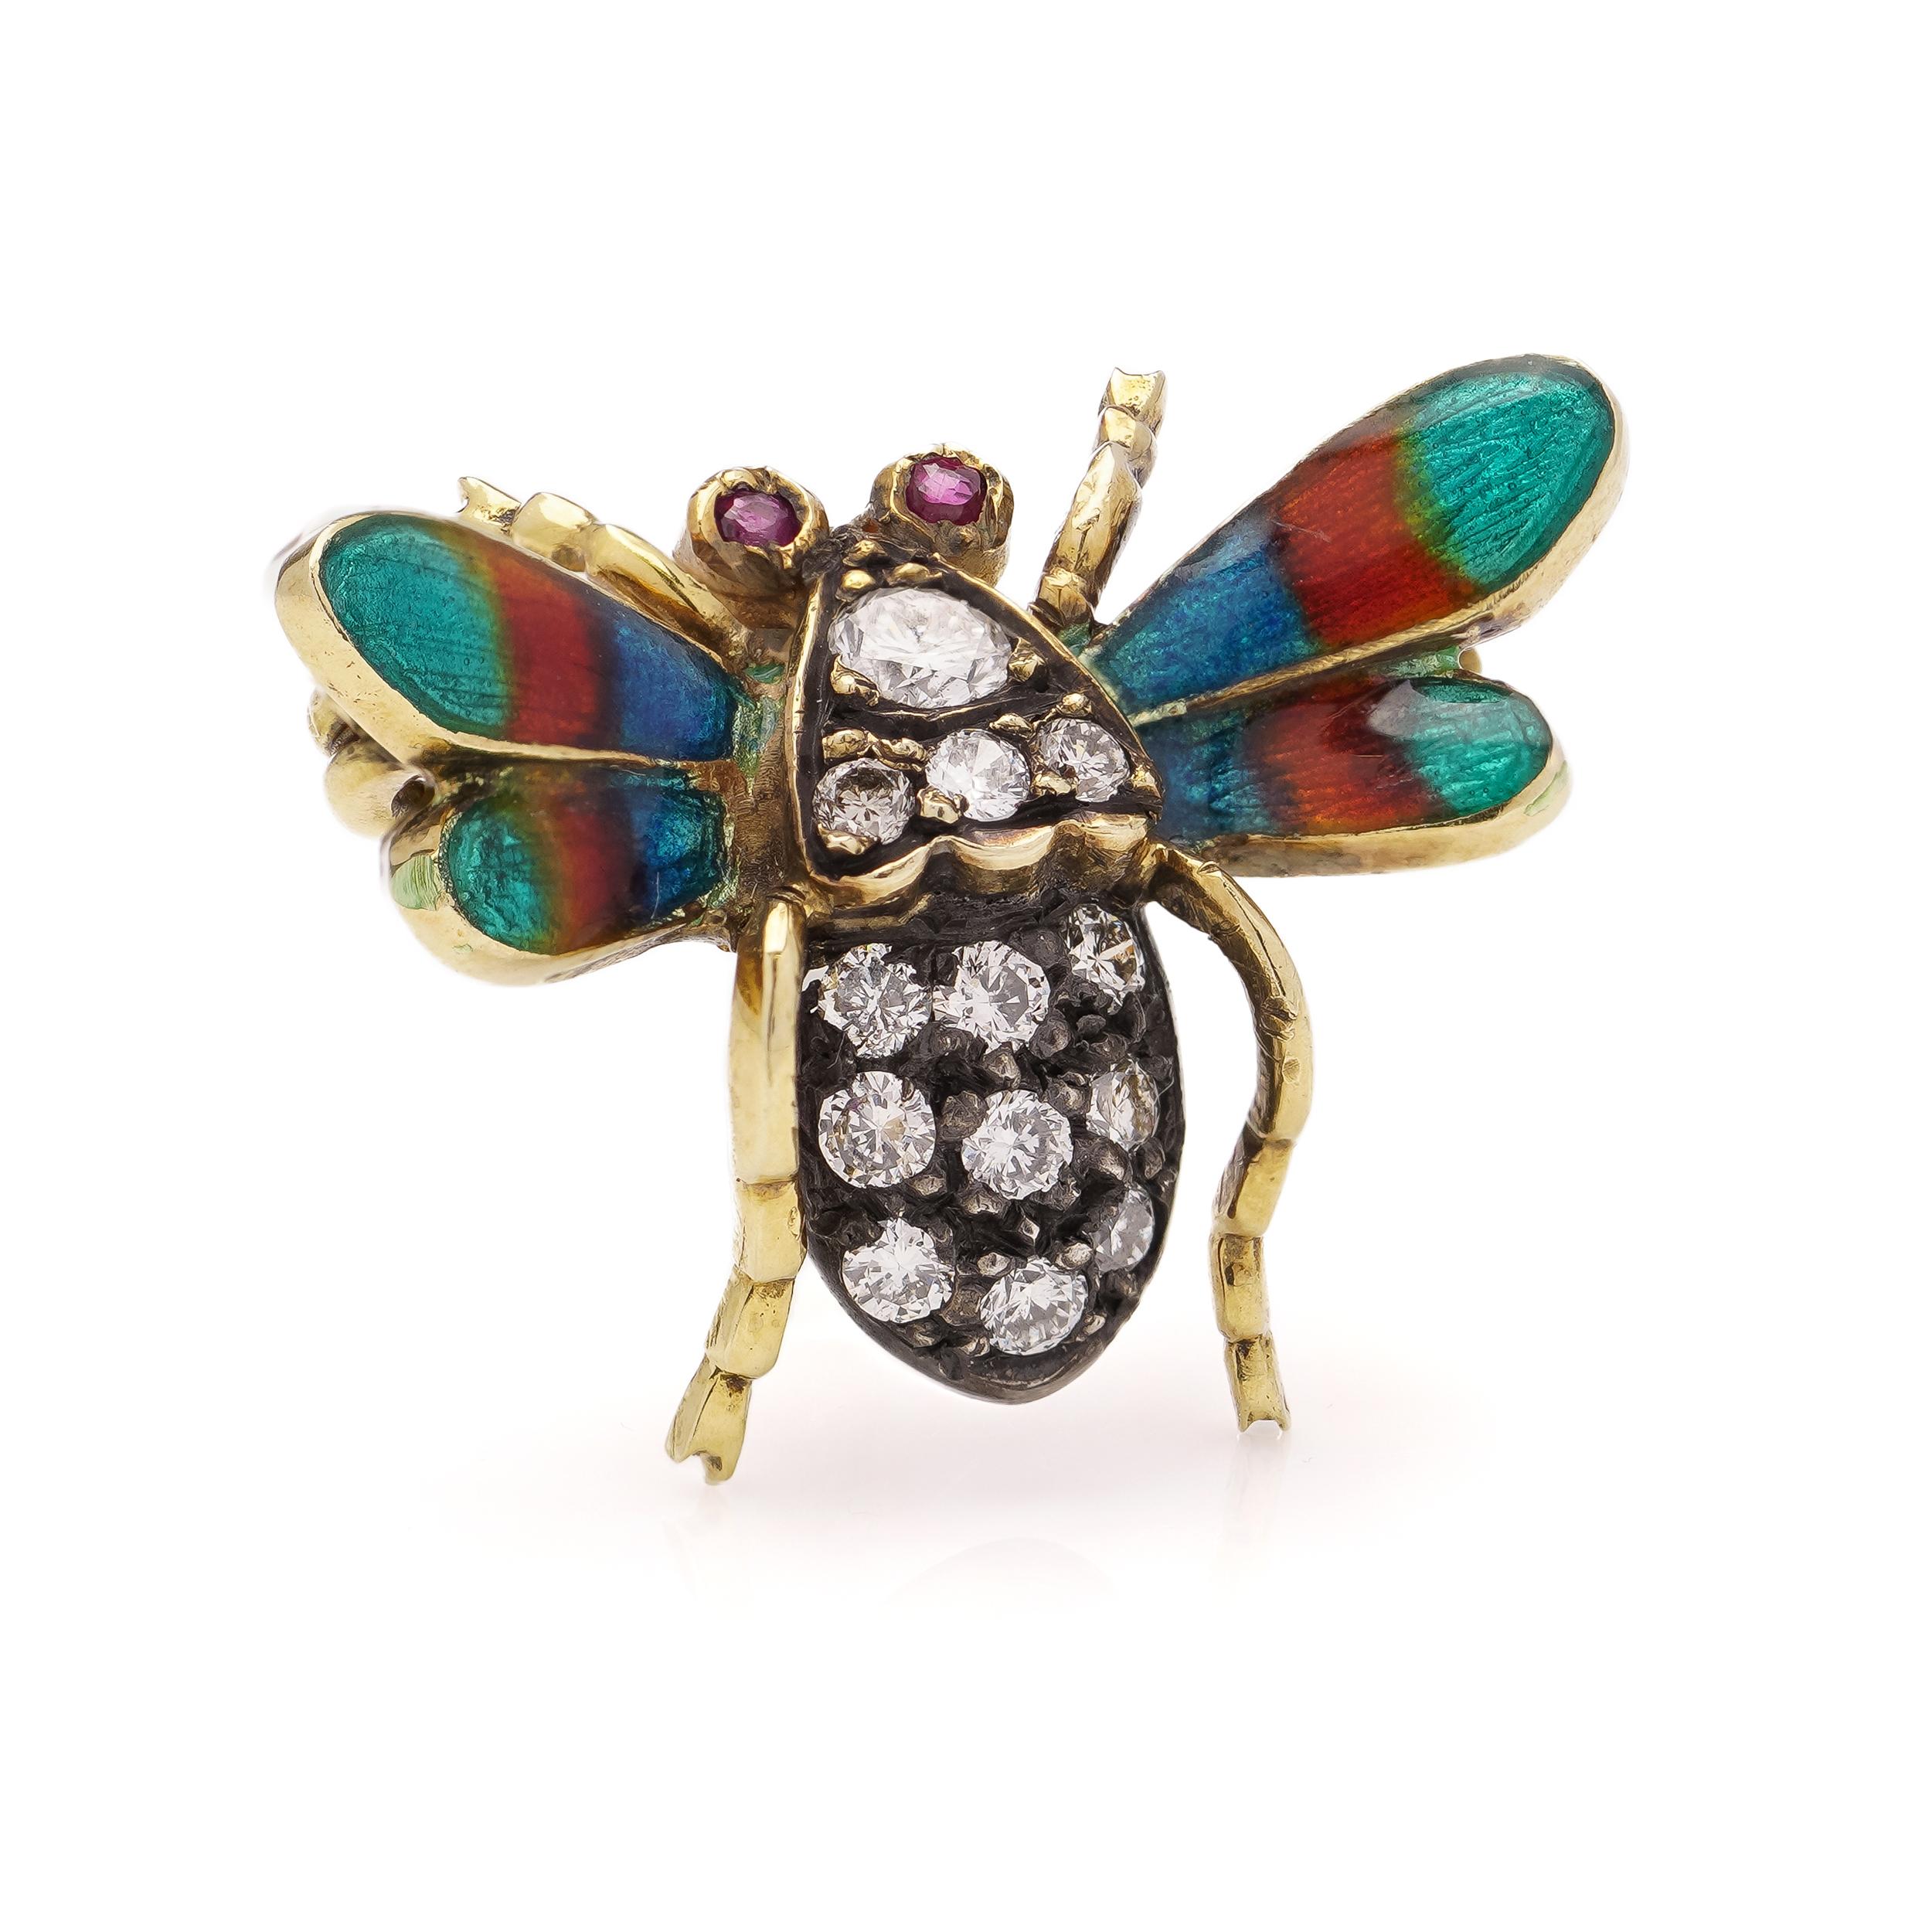  Edwardian 18kt. yellow gold and silver open-winged insect brooch For Sale 1